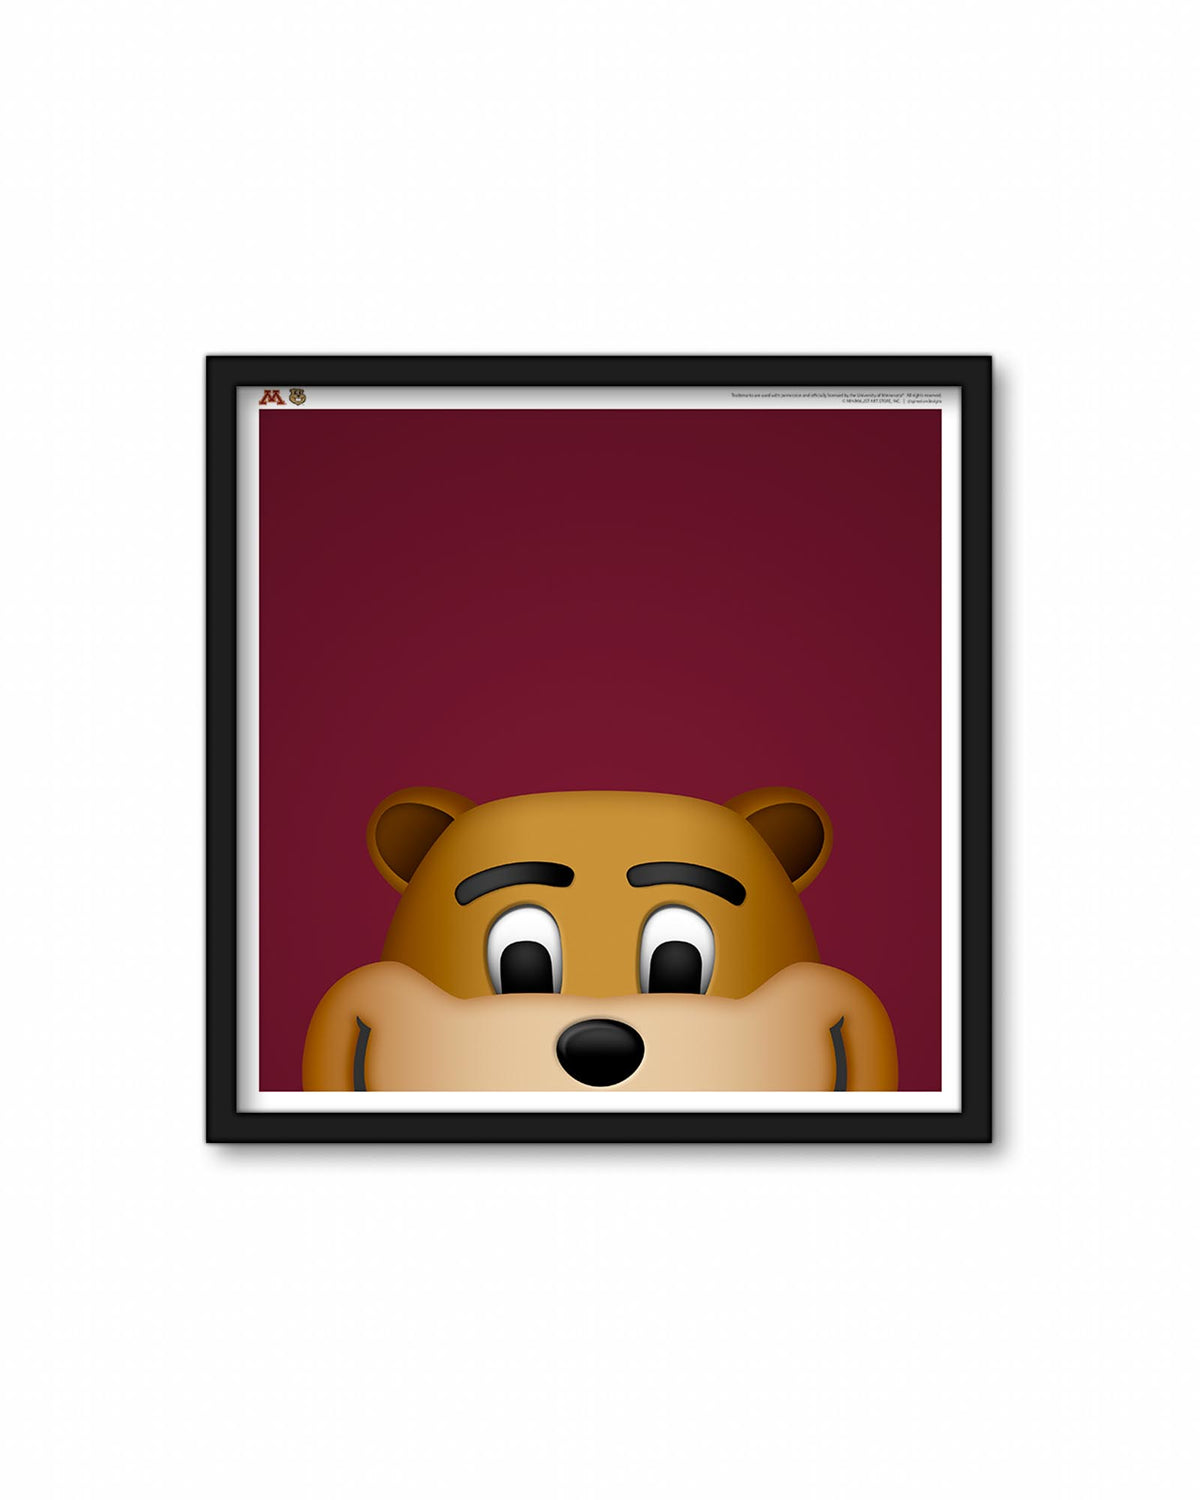 Minimalist Goldy Gopher Square Poster Print